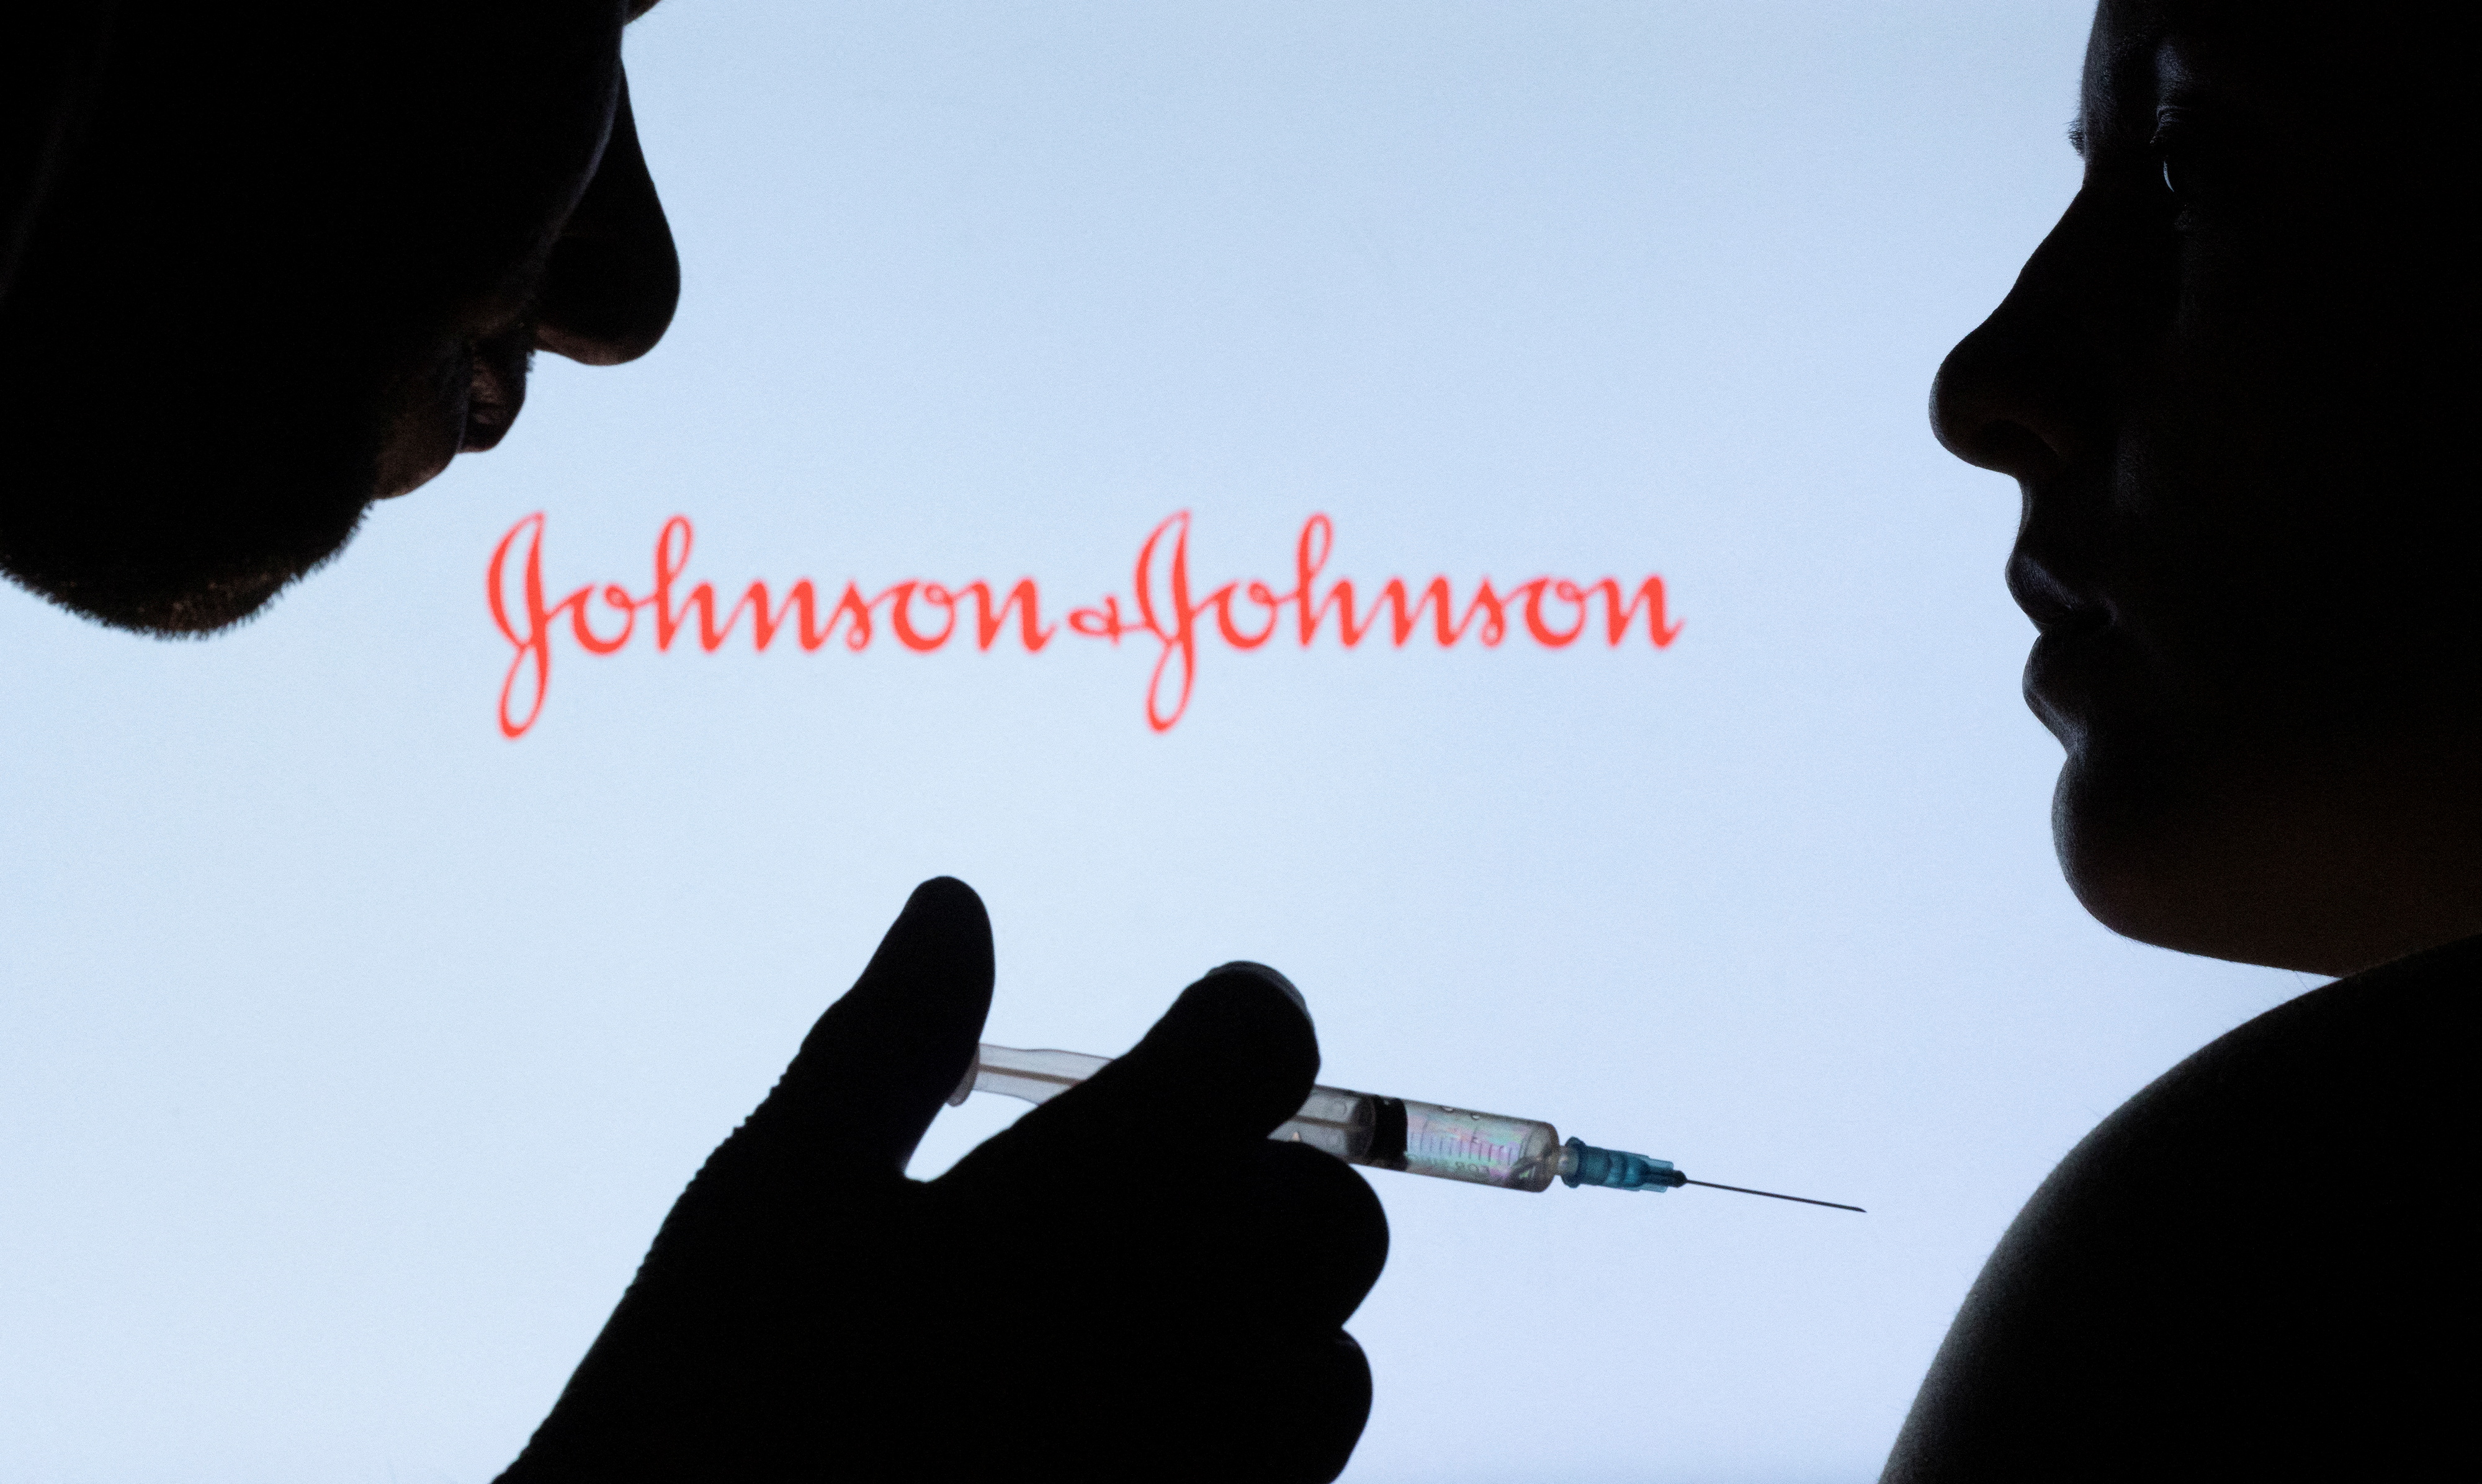 People pose with syringe with needle in front of displayed Johnson&Johnson logo